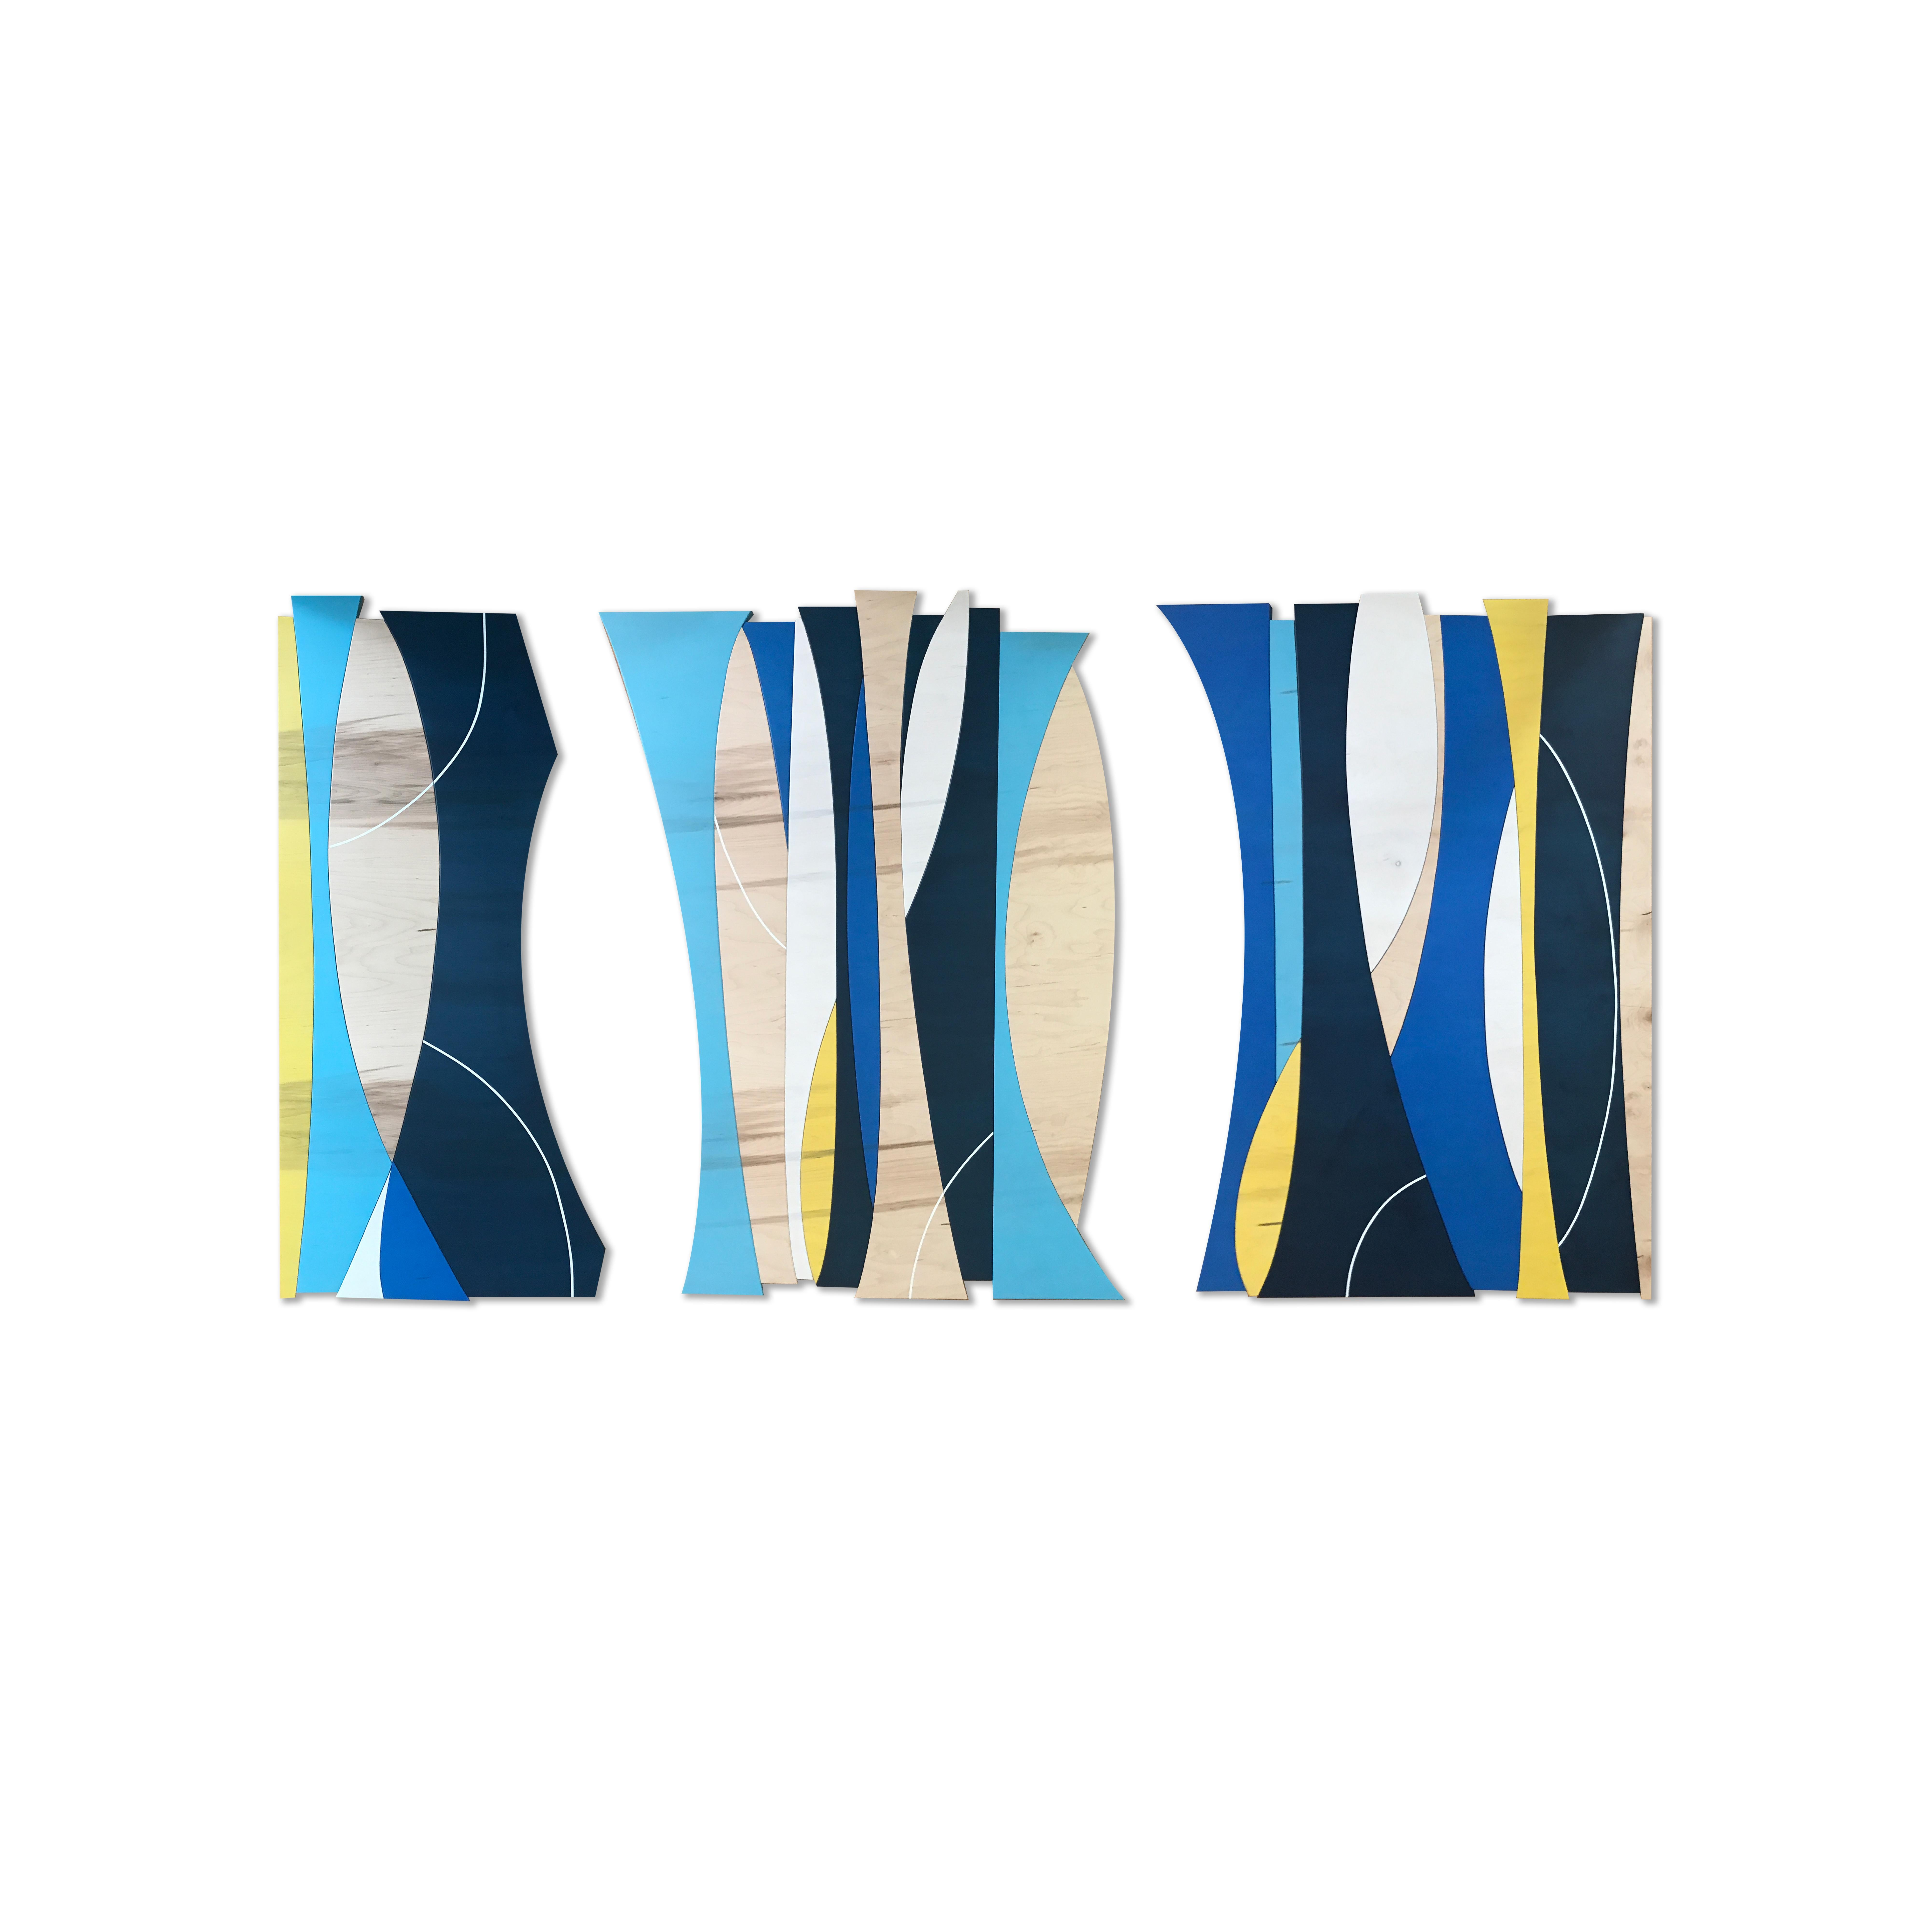 Scott Troxel Abstract Sculpture - "Solar Trees" Wall Sculpture - MCM, blue, yellow, white, wood, mid century